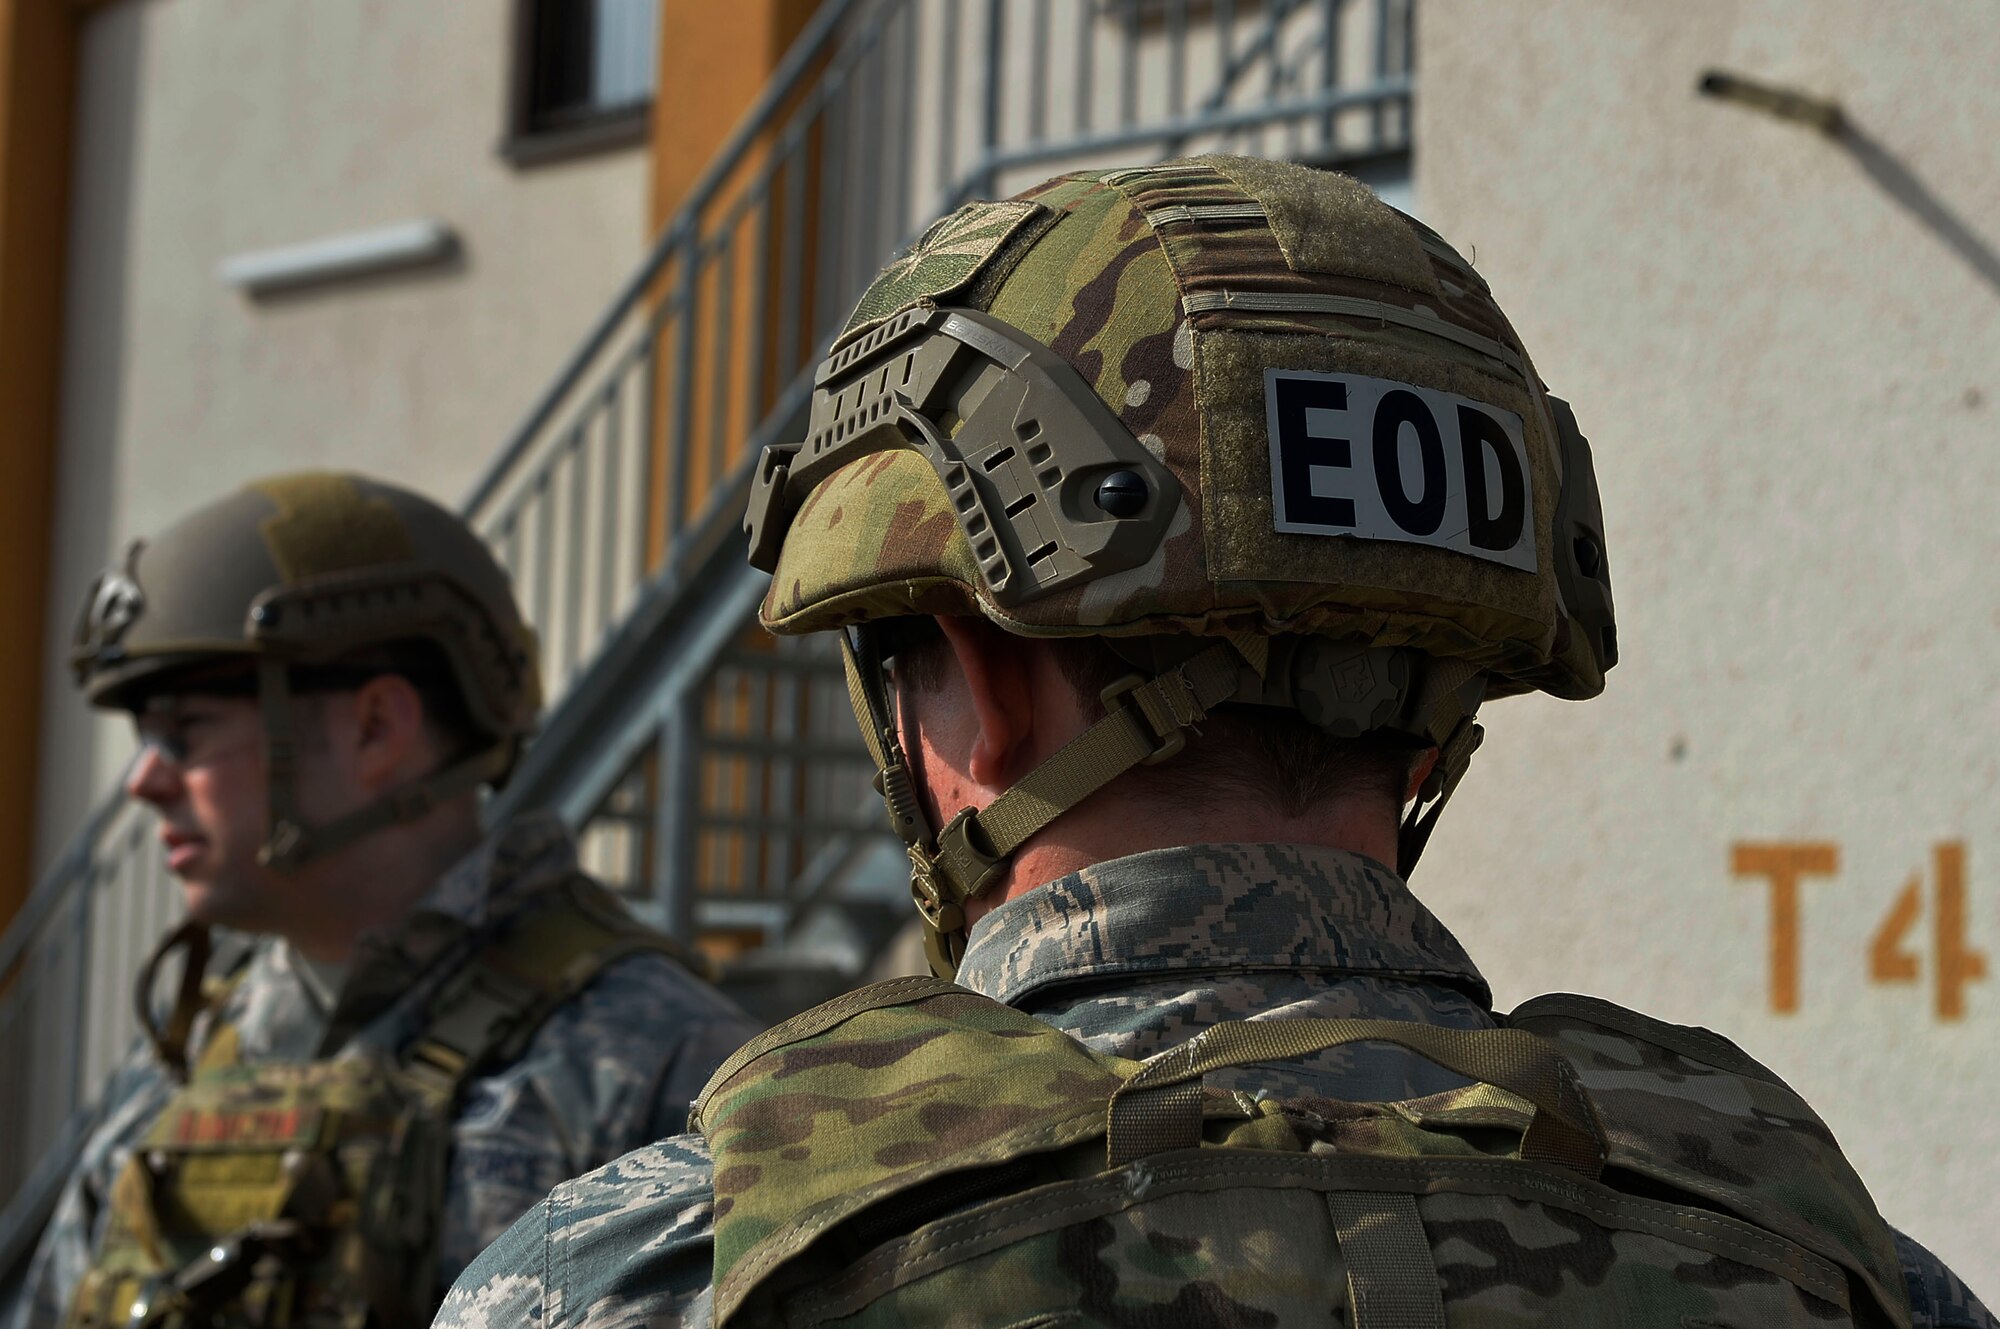 Explosive Ordnance Airmen prepare to perform a clearing operation at a building during an exercise on Ramstein Air Base, Germany March 23, 2017. EOD Airmen from different U.S. air bases around Germany participated in Exercise Silver Flag, which aims to enhance mission readiness in contingency Airmen. Exercise Silver flag is held (how many times a year) (U.S. Air Force photo by Airman 1st Class Joshua Magbanua) 

